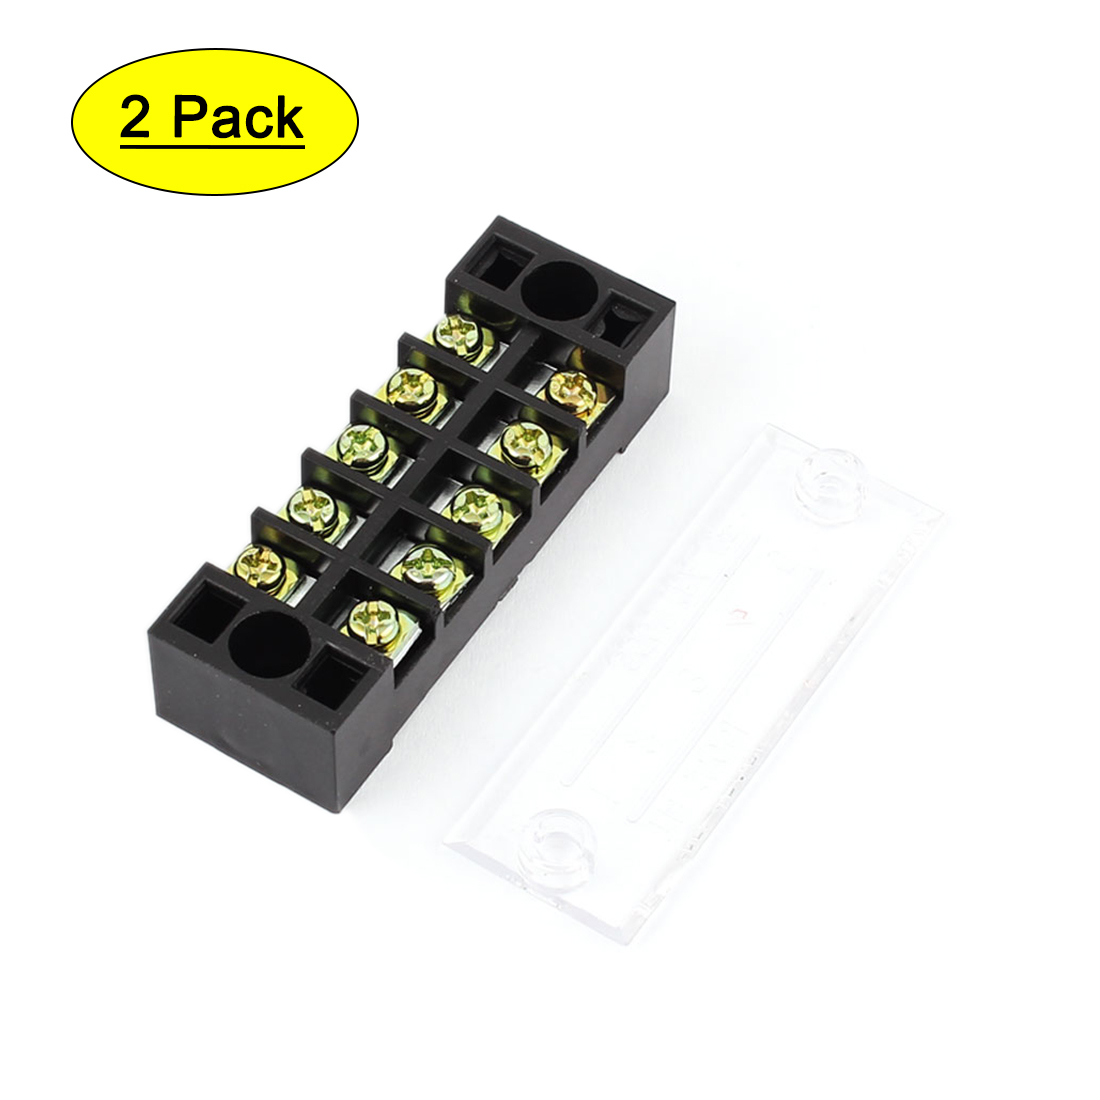 2pcs 600V 15A 5P Dual Row Electric Barrier Terminal Block Cable Connector Bar - image 1 of 4